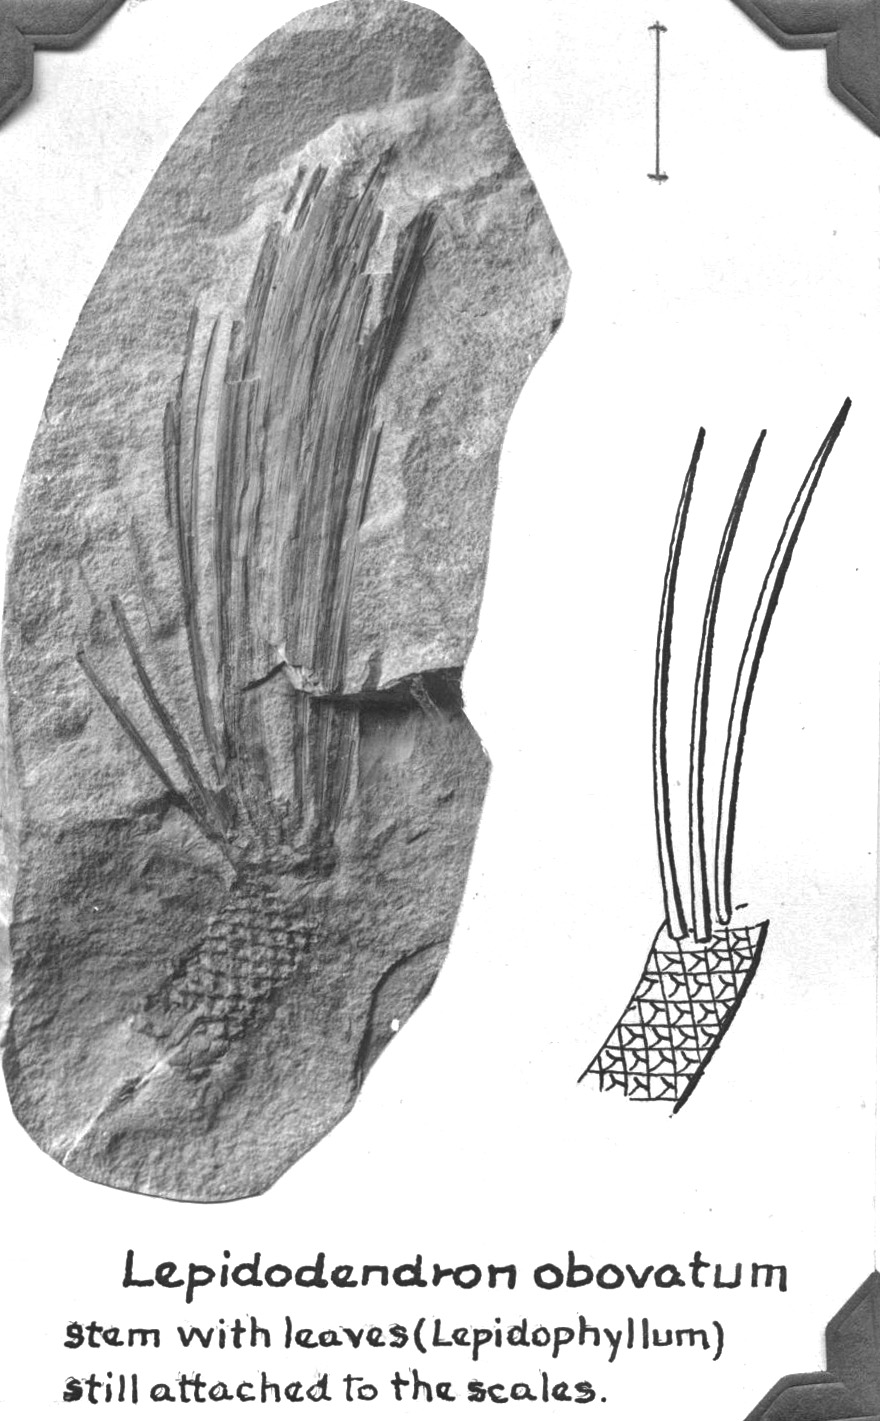 Lepidodendron obovatum, GL photograph and sketch, page 38